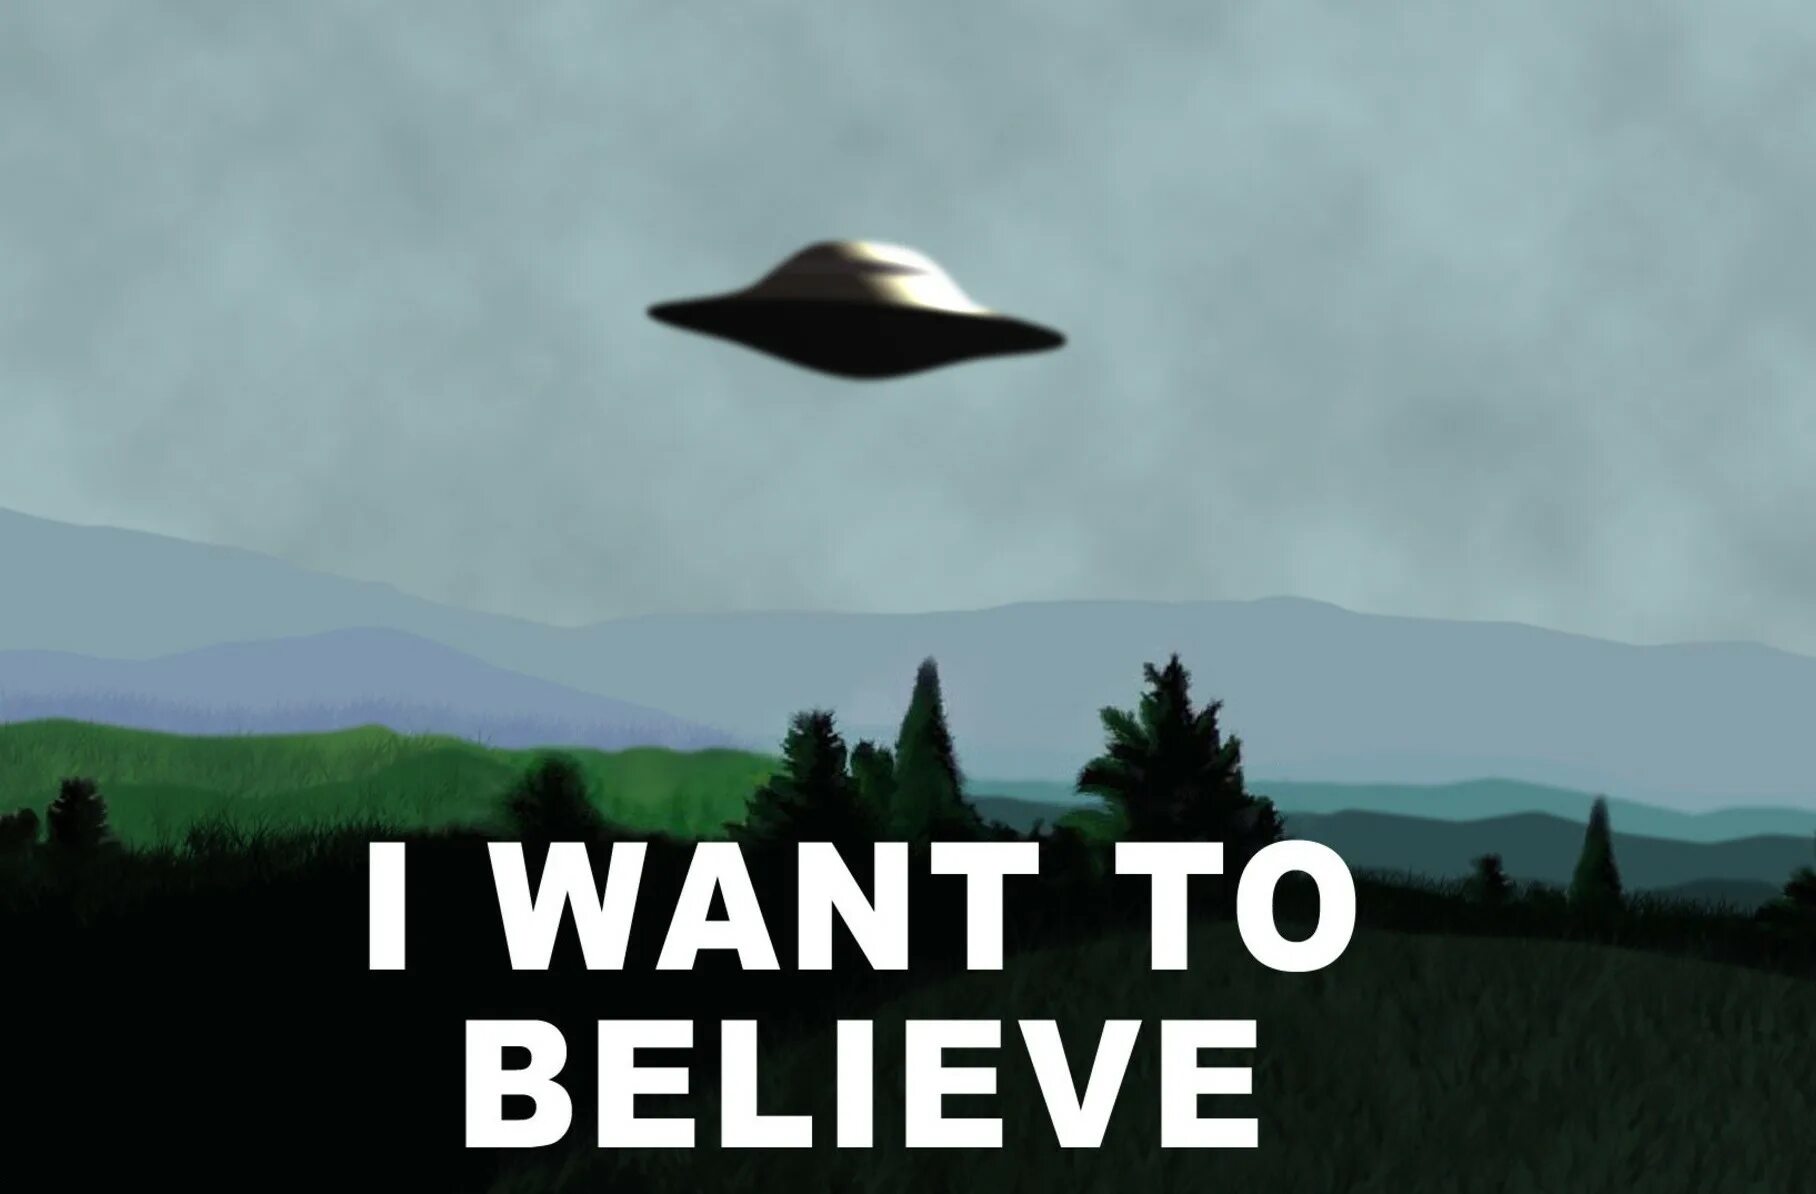 Started to believe. Плакат секретные материалы i want to believe. I want to believe Постер Малдера. Постер x files i want to believe. Секретные материалы хочу верить плакат.